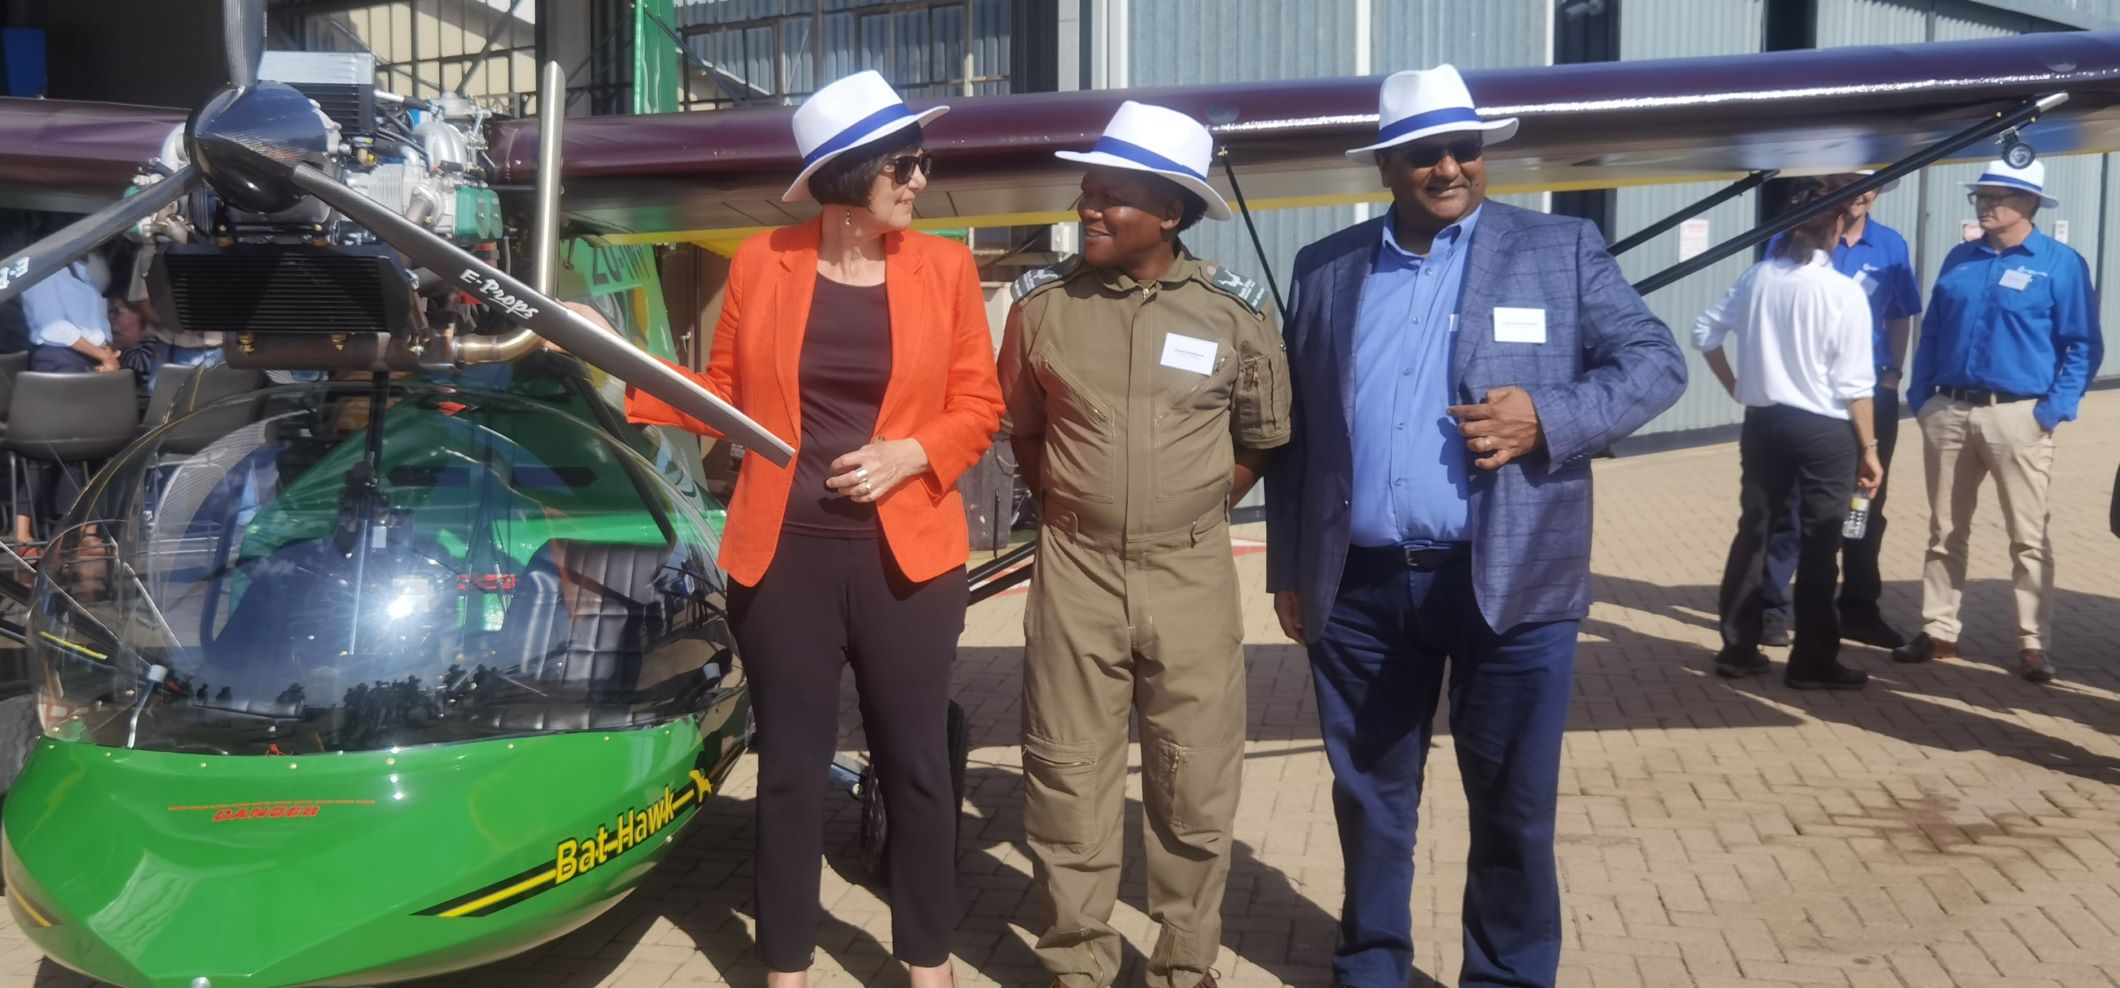 The Minister of Forestry, Fisheries and the Environment, Ms Barbara Creecy officially receives the Bat Hawk Light aircraft from Anglo American Platinum on behalf of SANParks. With her are Executive head: Projects at Anglo American Platinum – Mr Prakashim Moodliar and SANParks Chief Pilot, David Simelane
